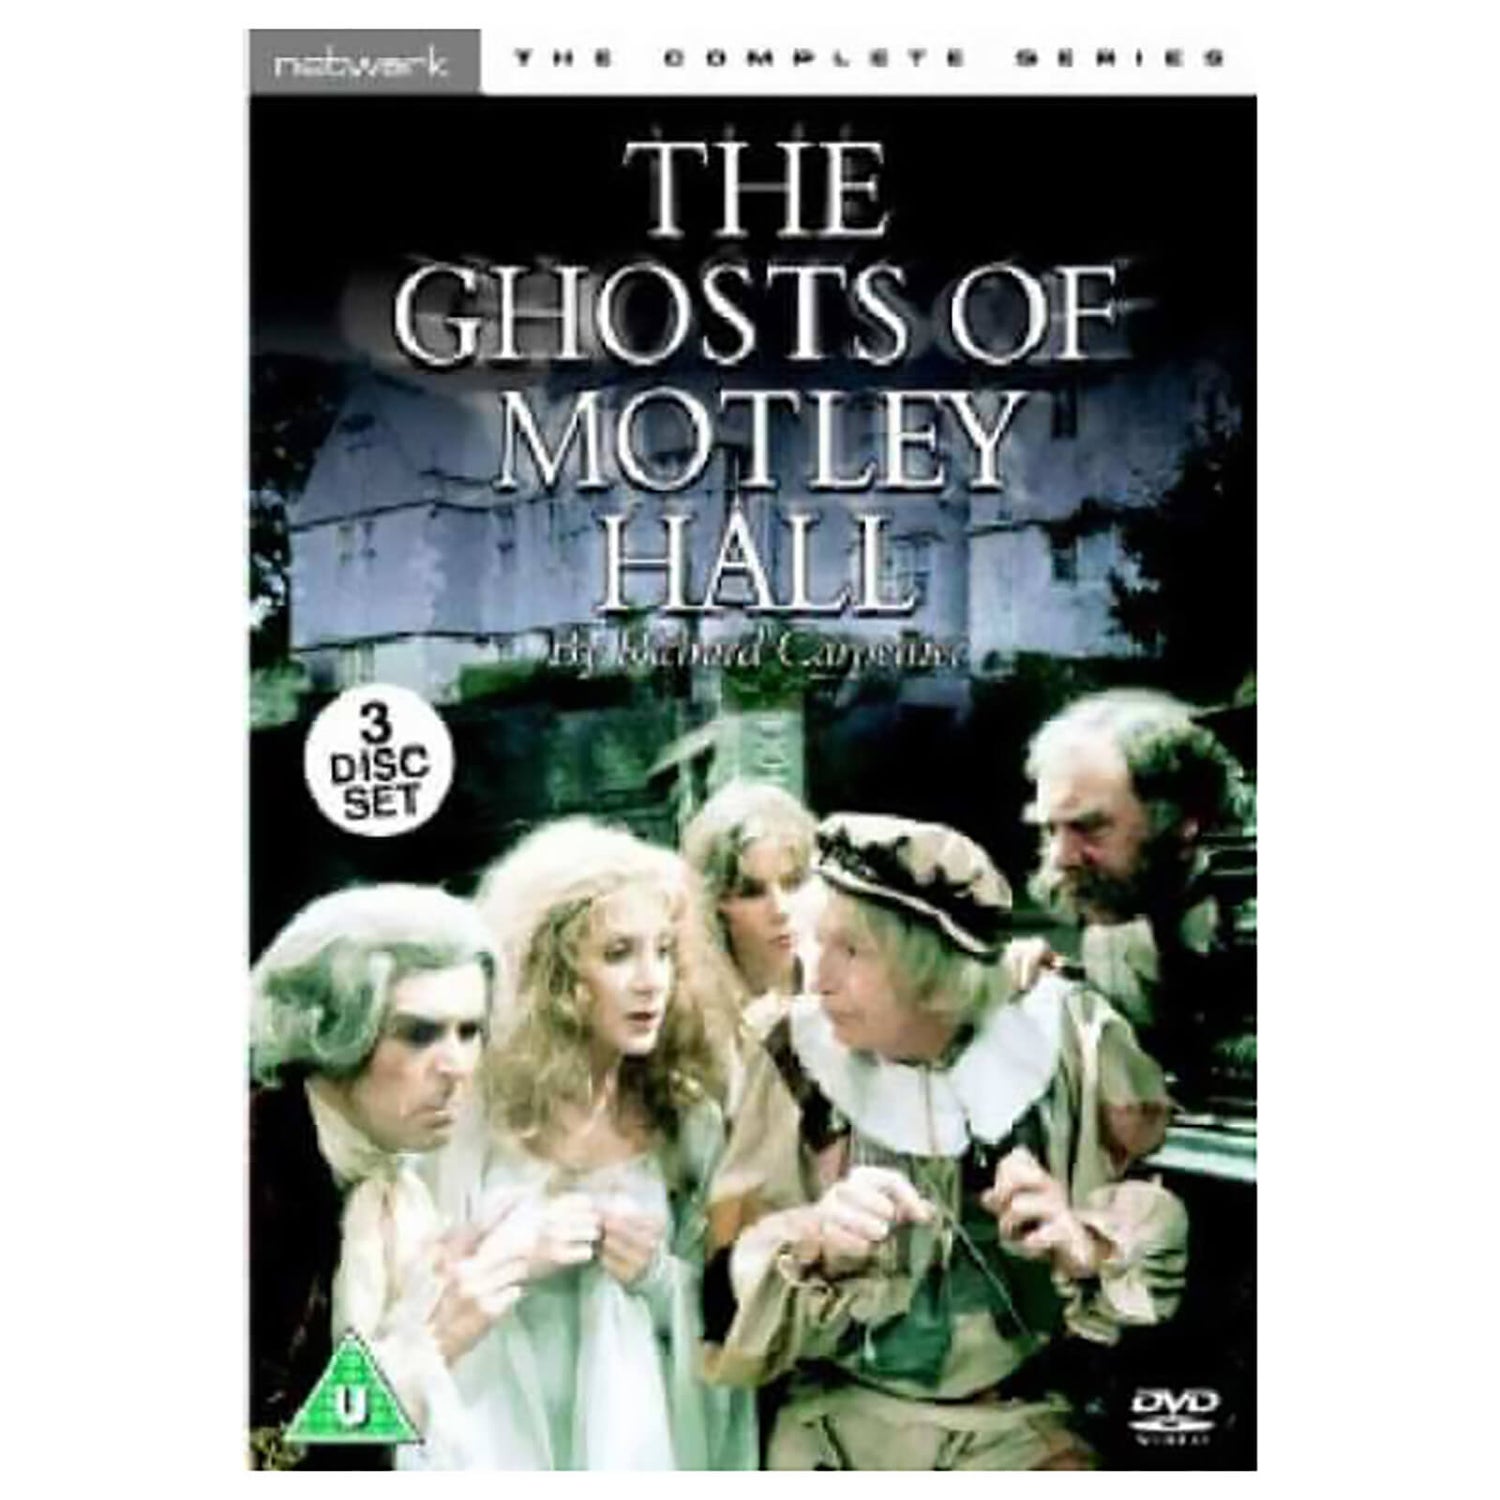 GHOSTS OF MOTLEY HALL, THE (DVD)